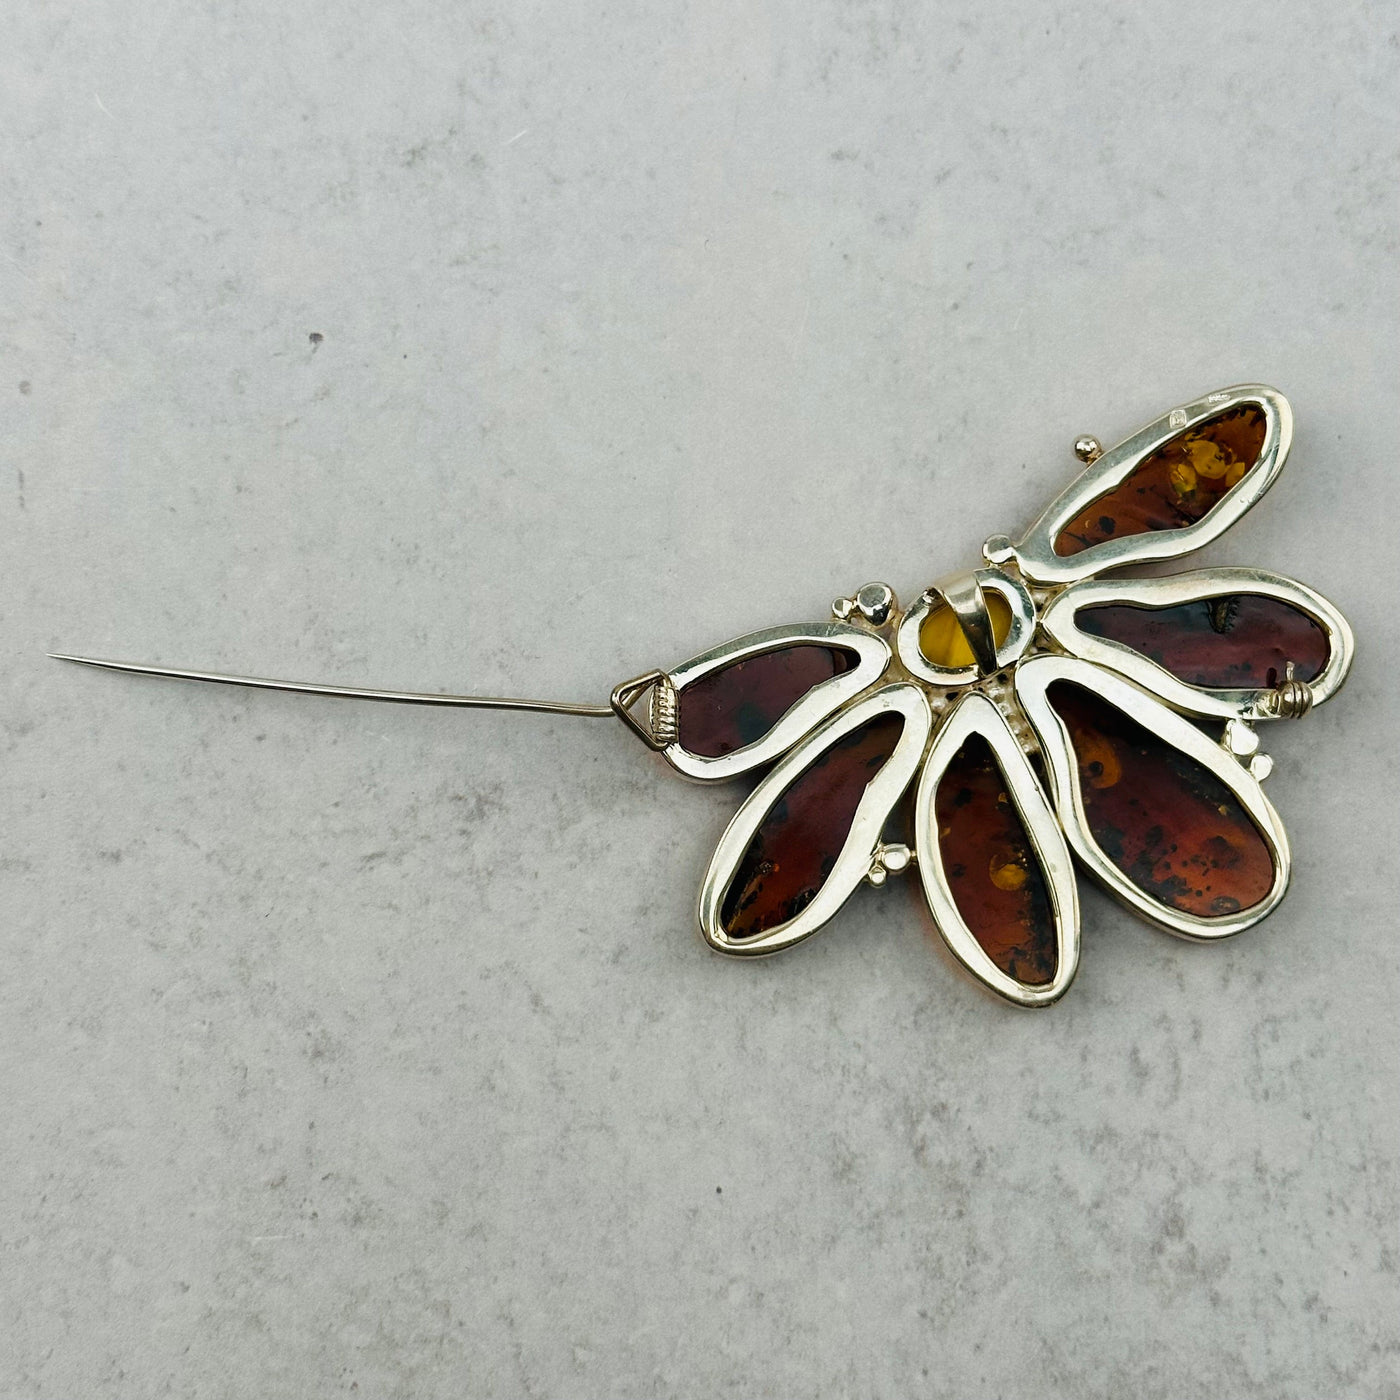 amber pendant is also a broche that can be pinned on to your favorite outfit 